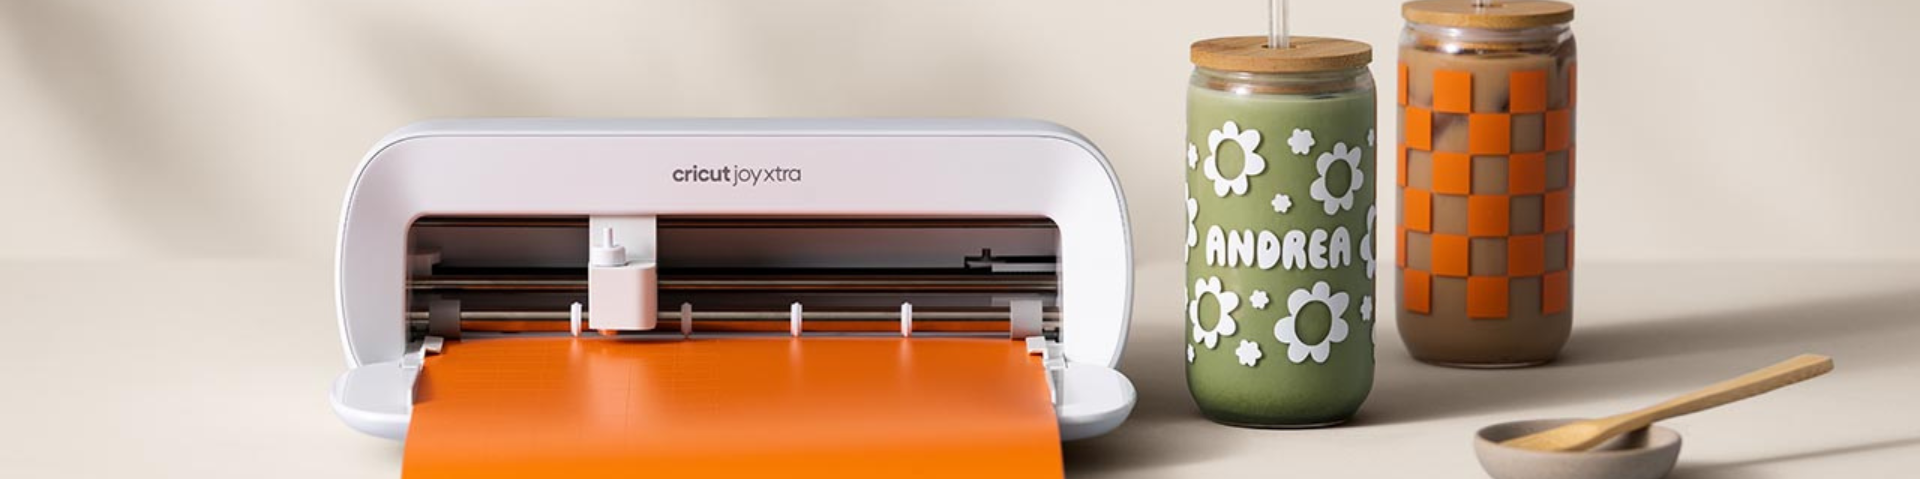 Cricut Joy Xtra Unboxing - What's Inside and What Sets It Apart to Make it  Extra! 